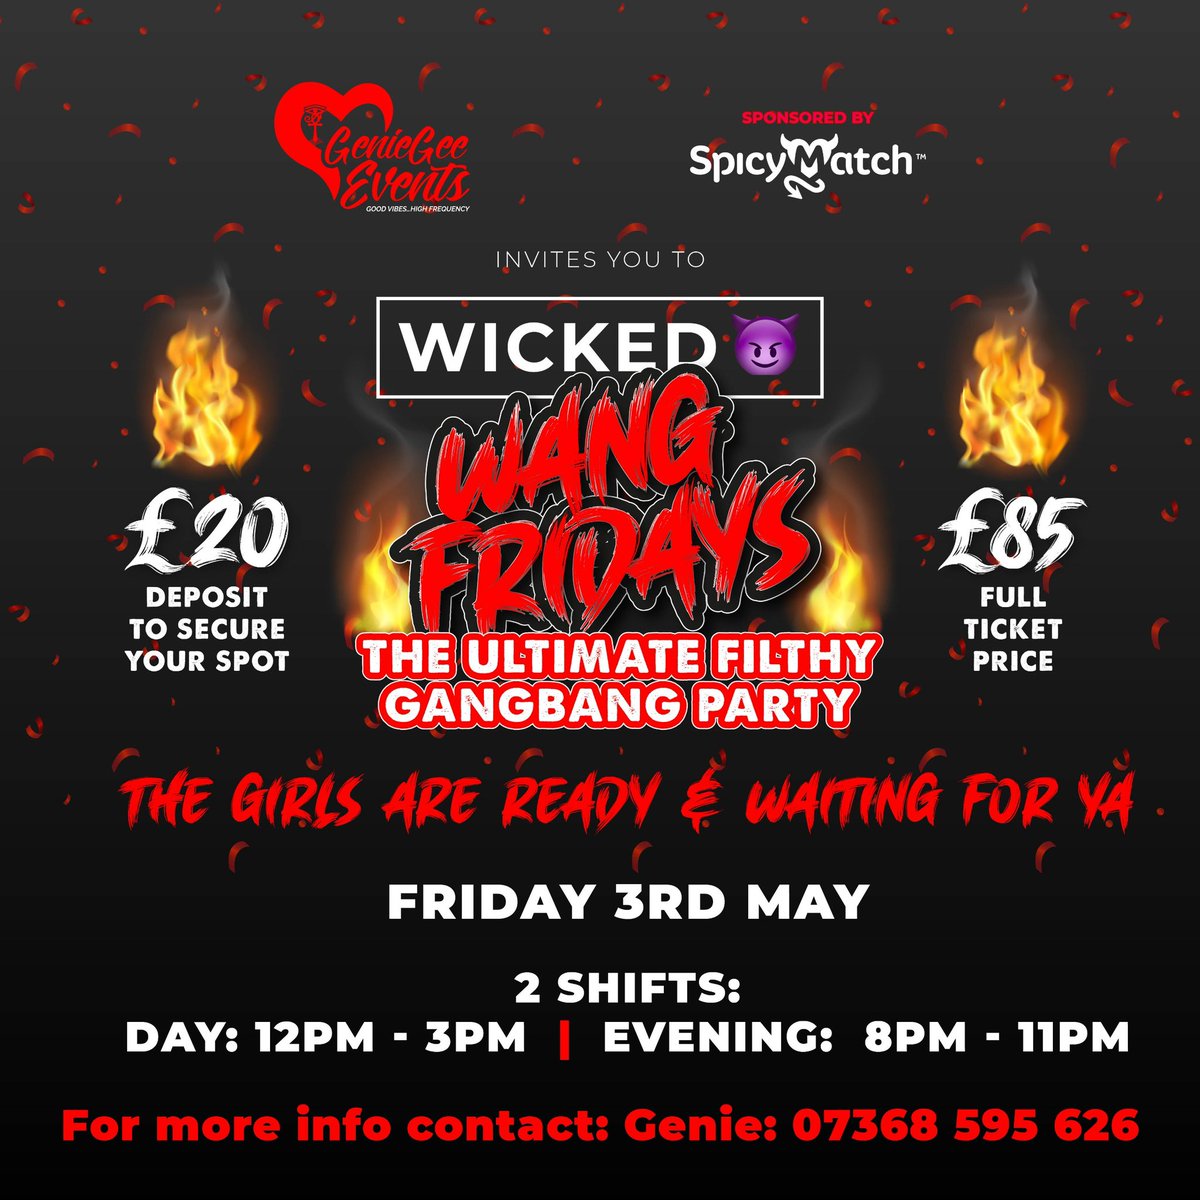 THIS FRIDAY!! 3.5.24 West London Wicked Wang Friday! invites you to… ‘Buss-A-Nut’ A Filthy GangBang Experience!!! Greedy girls are waiting for their greedy boys 😈💋 🤭😜🍆💦💦💦 Get tickets 🎫 Here 👇🏾👇🏾👇🏾 buytickets.at/geniegee/12142… Sponsored by SpicyMatch.com